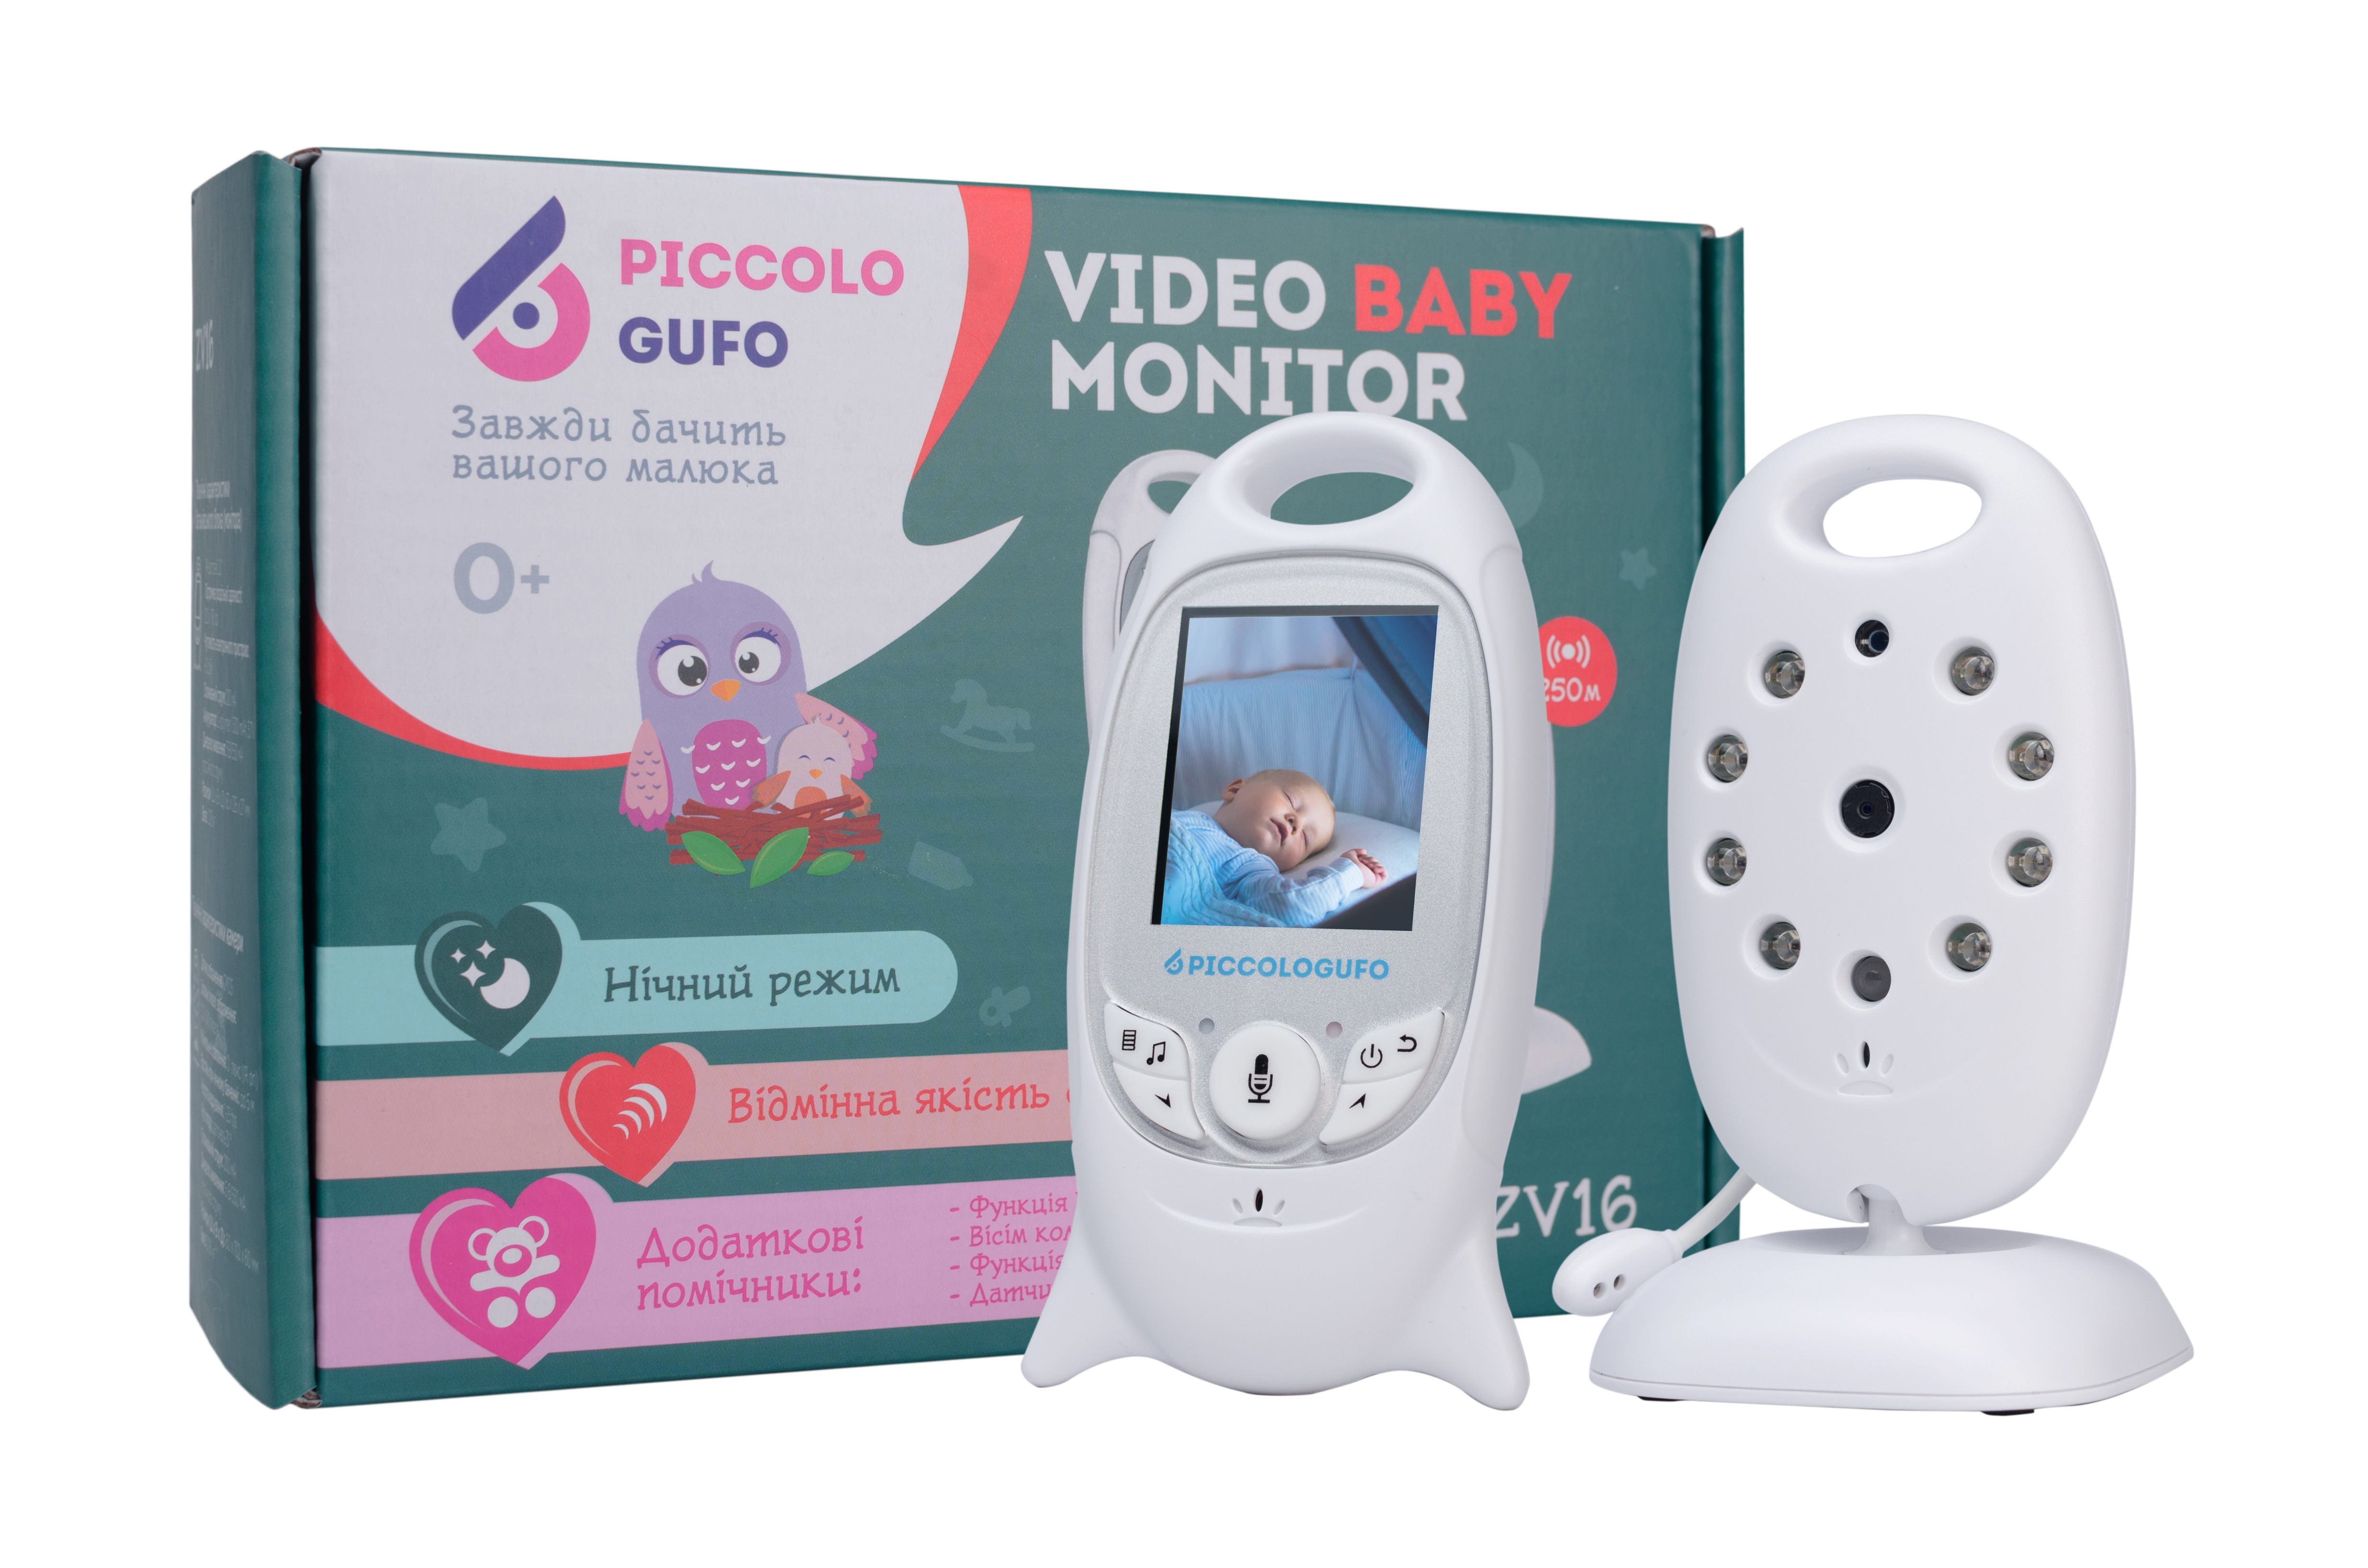 Video Baby Monitor PICCOLOGUFO ZV16 with 2.0' display